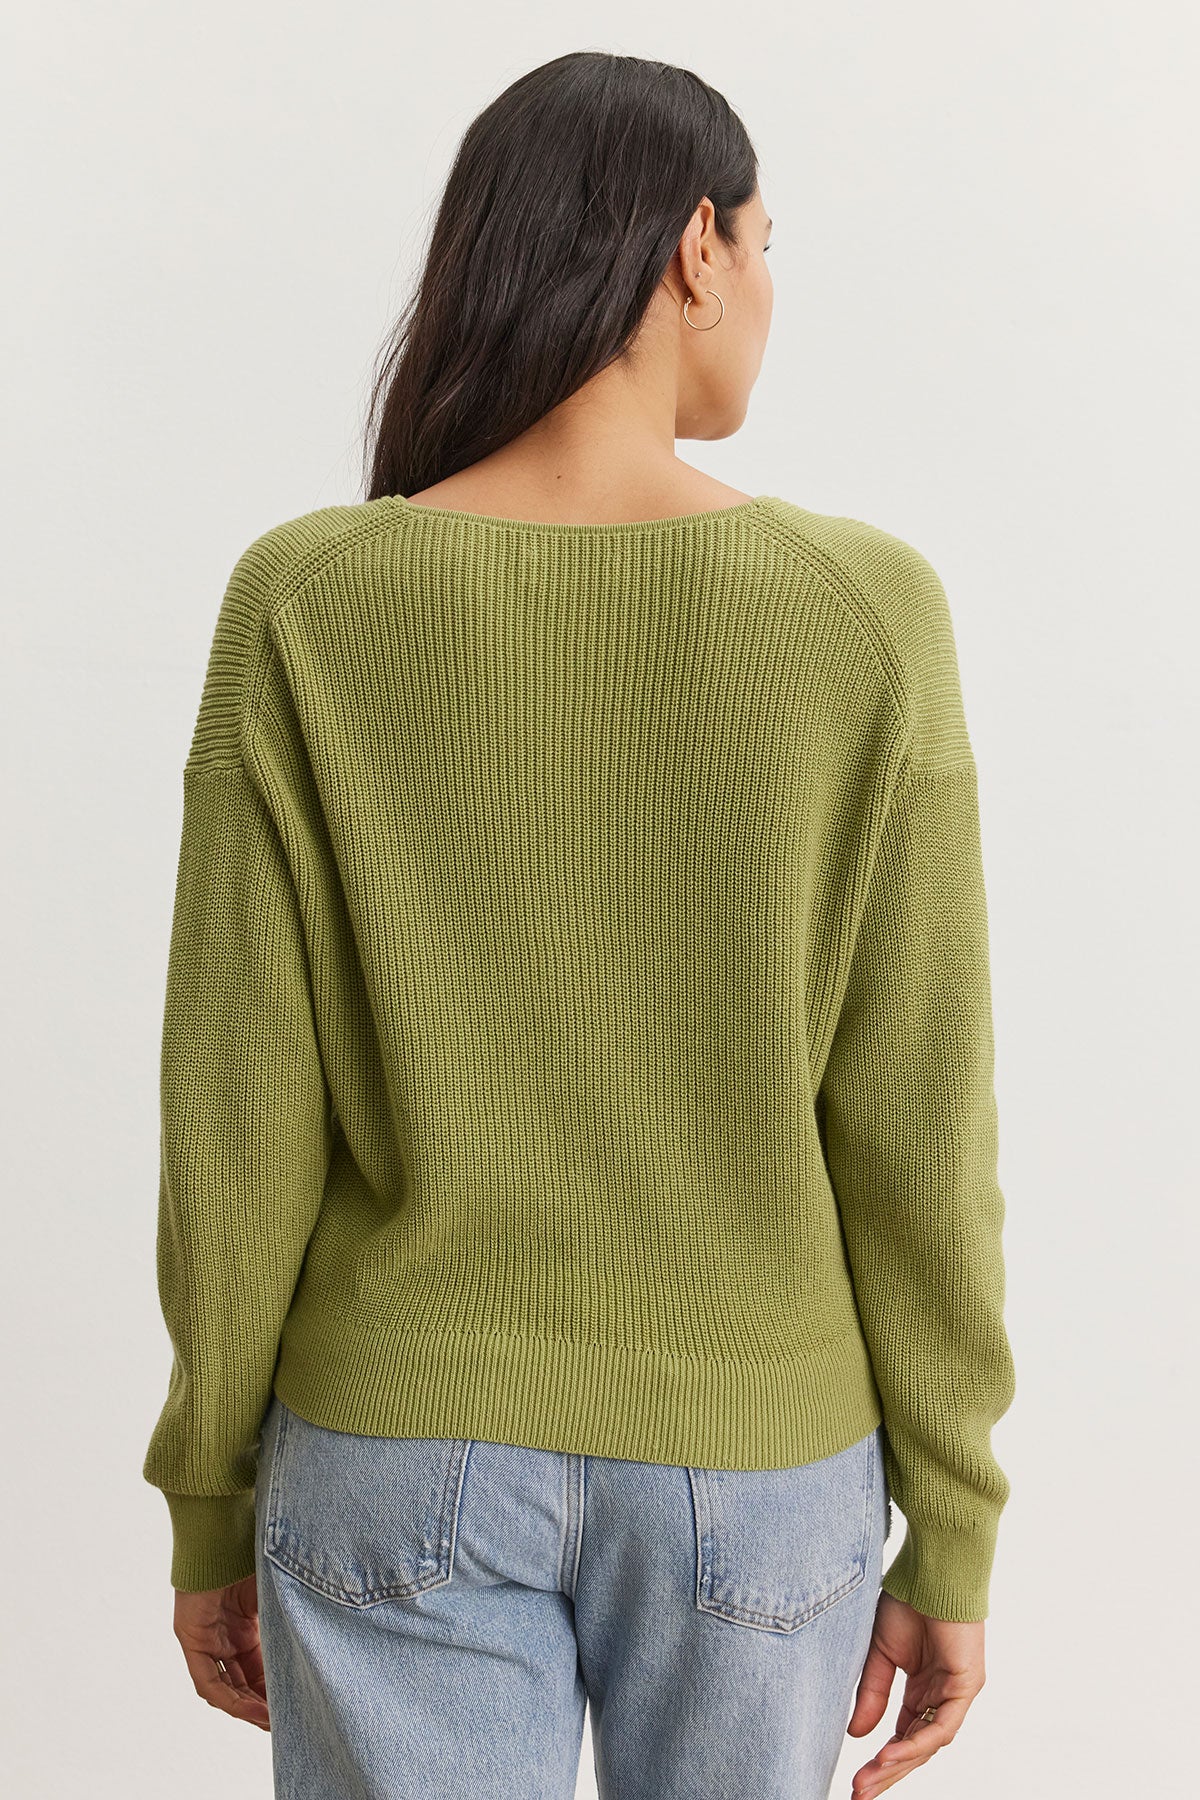 Woman viewed from behind wearing a Velvet by Graham & Spencer Tava Cardigan and faded blue jeans, standing against a plain white background.-36998741754049